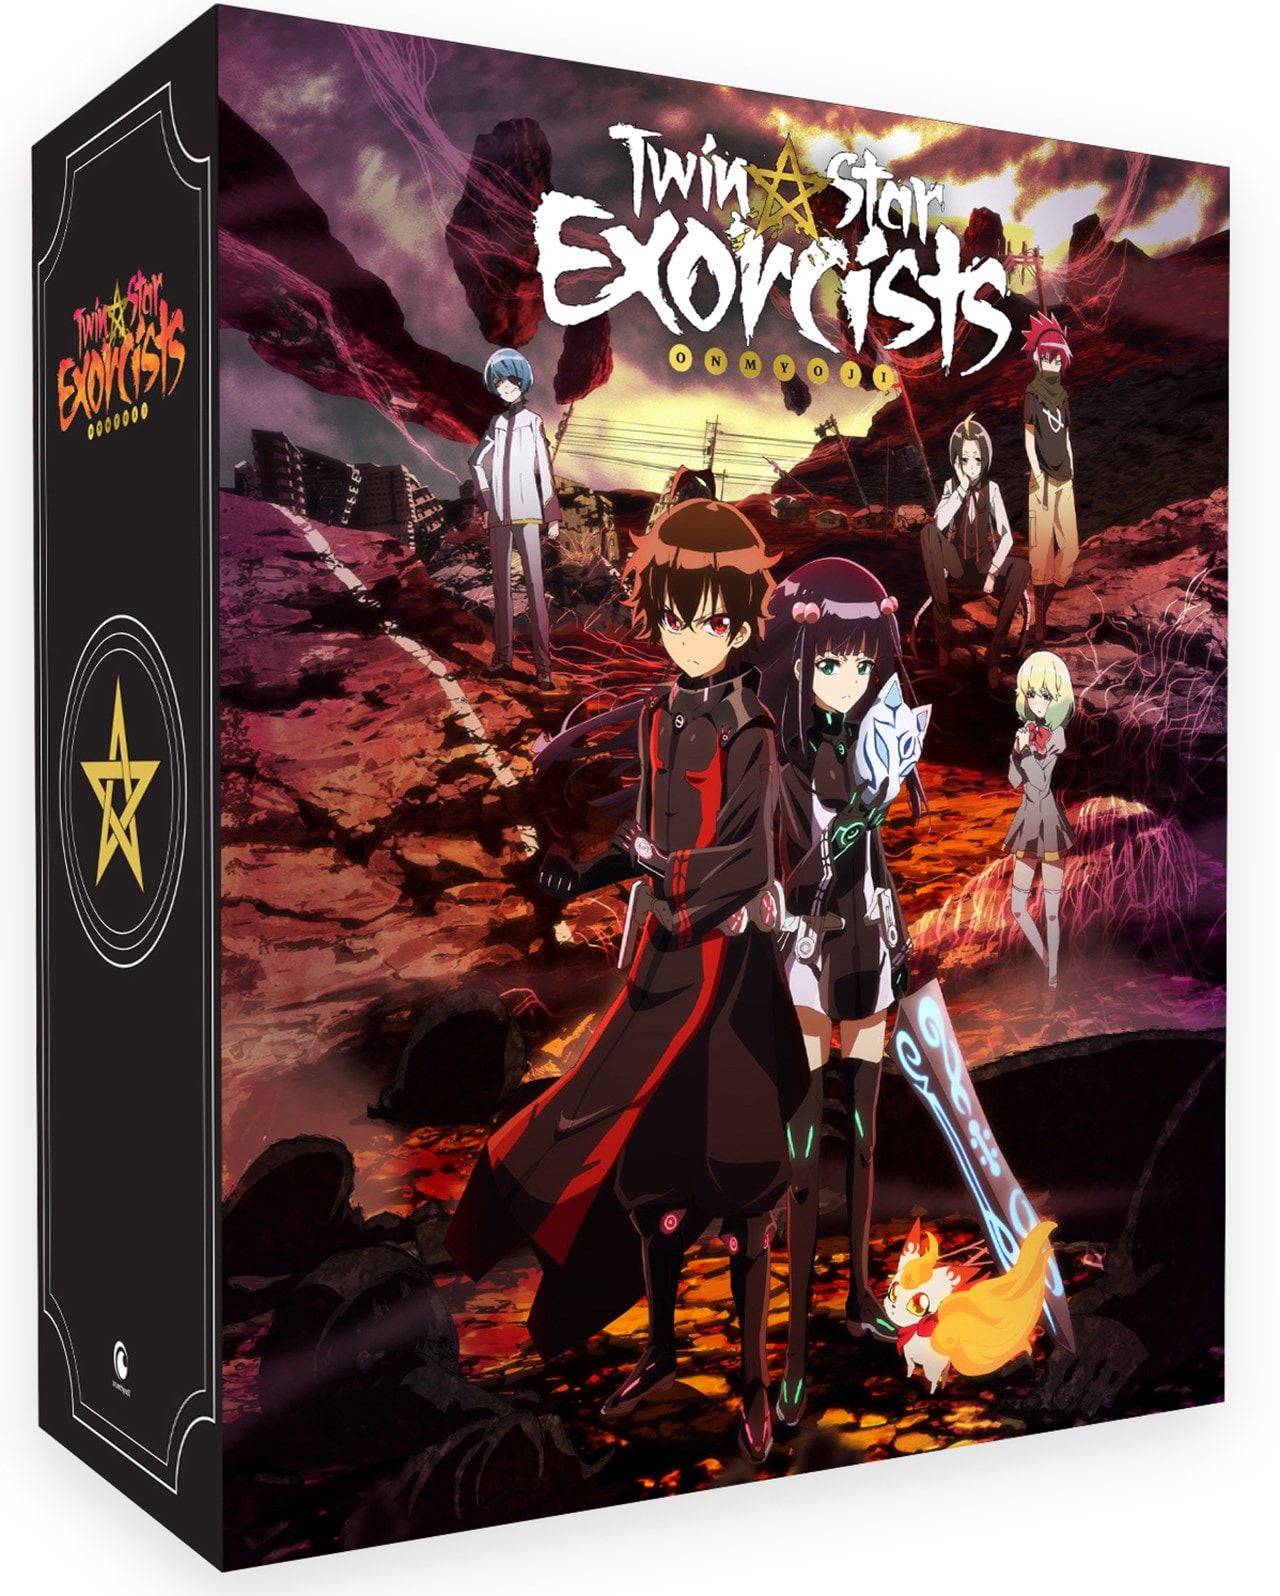 Twin Star Exorcists: Part 1 | Blu-ray | Free shipping over £20 | HMV Store